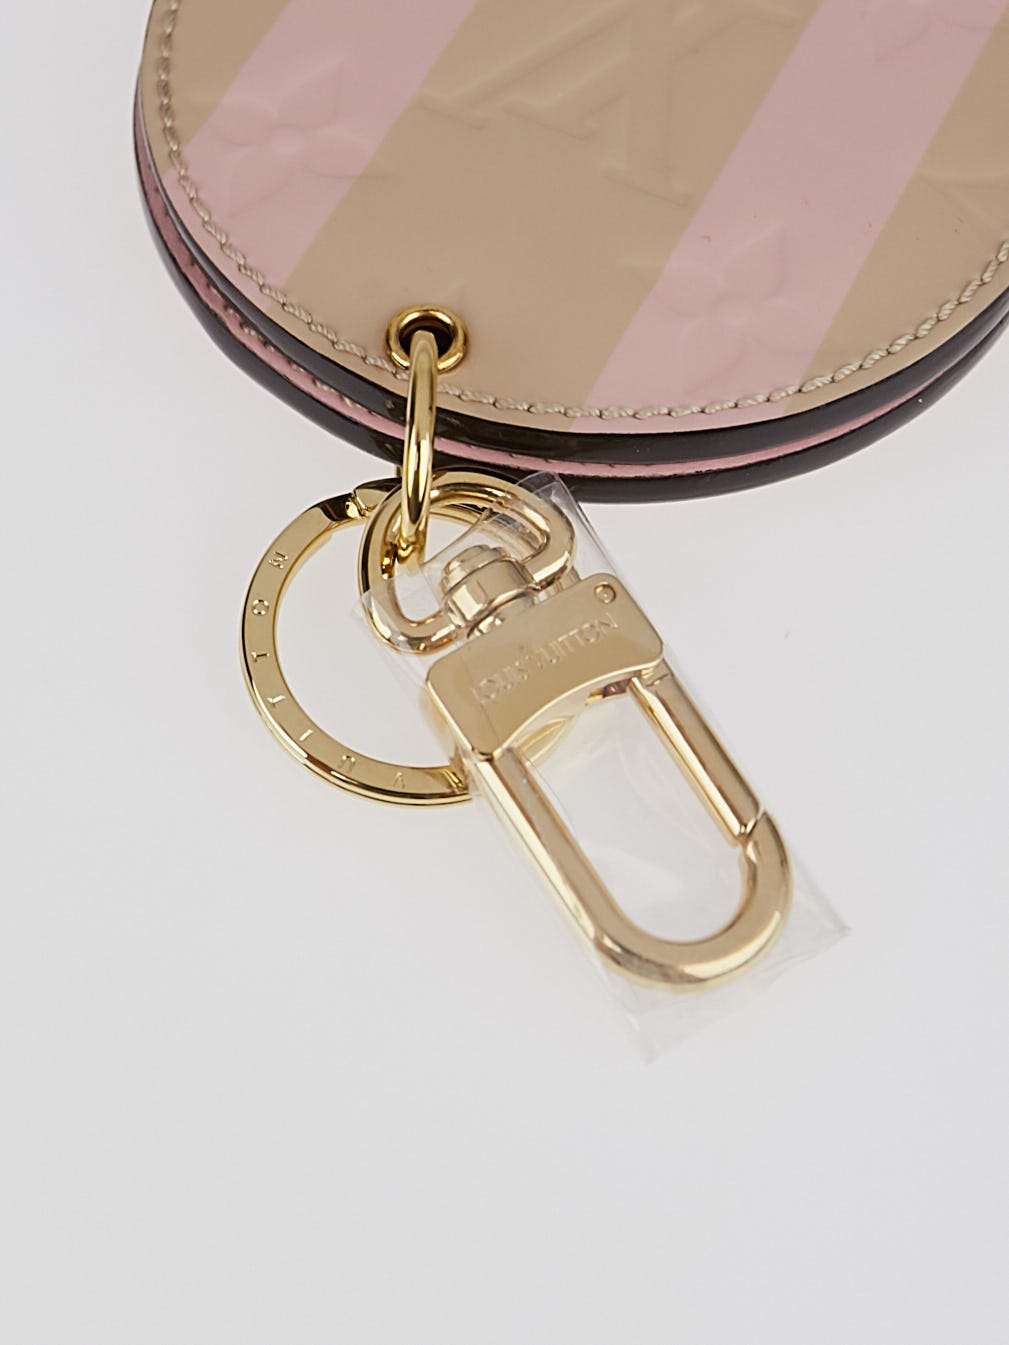 Louis Vuitton Mirror Keychain Bag Charm Made In Italy Accessories